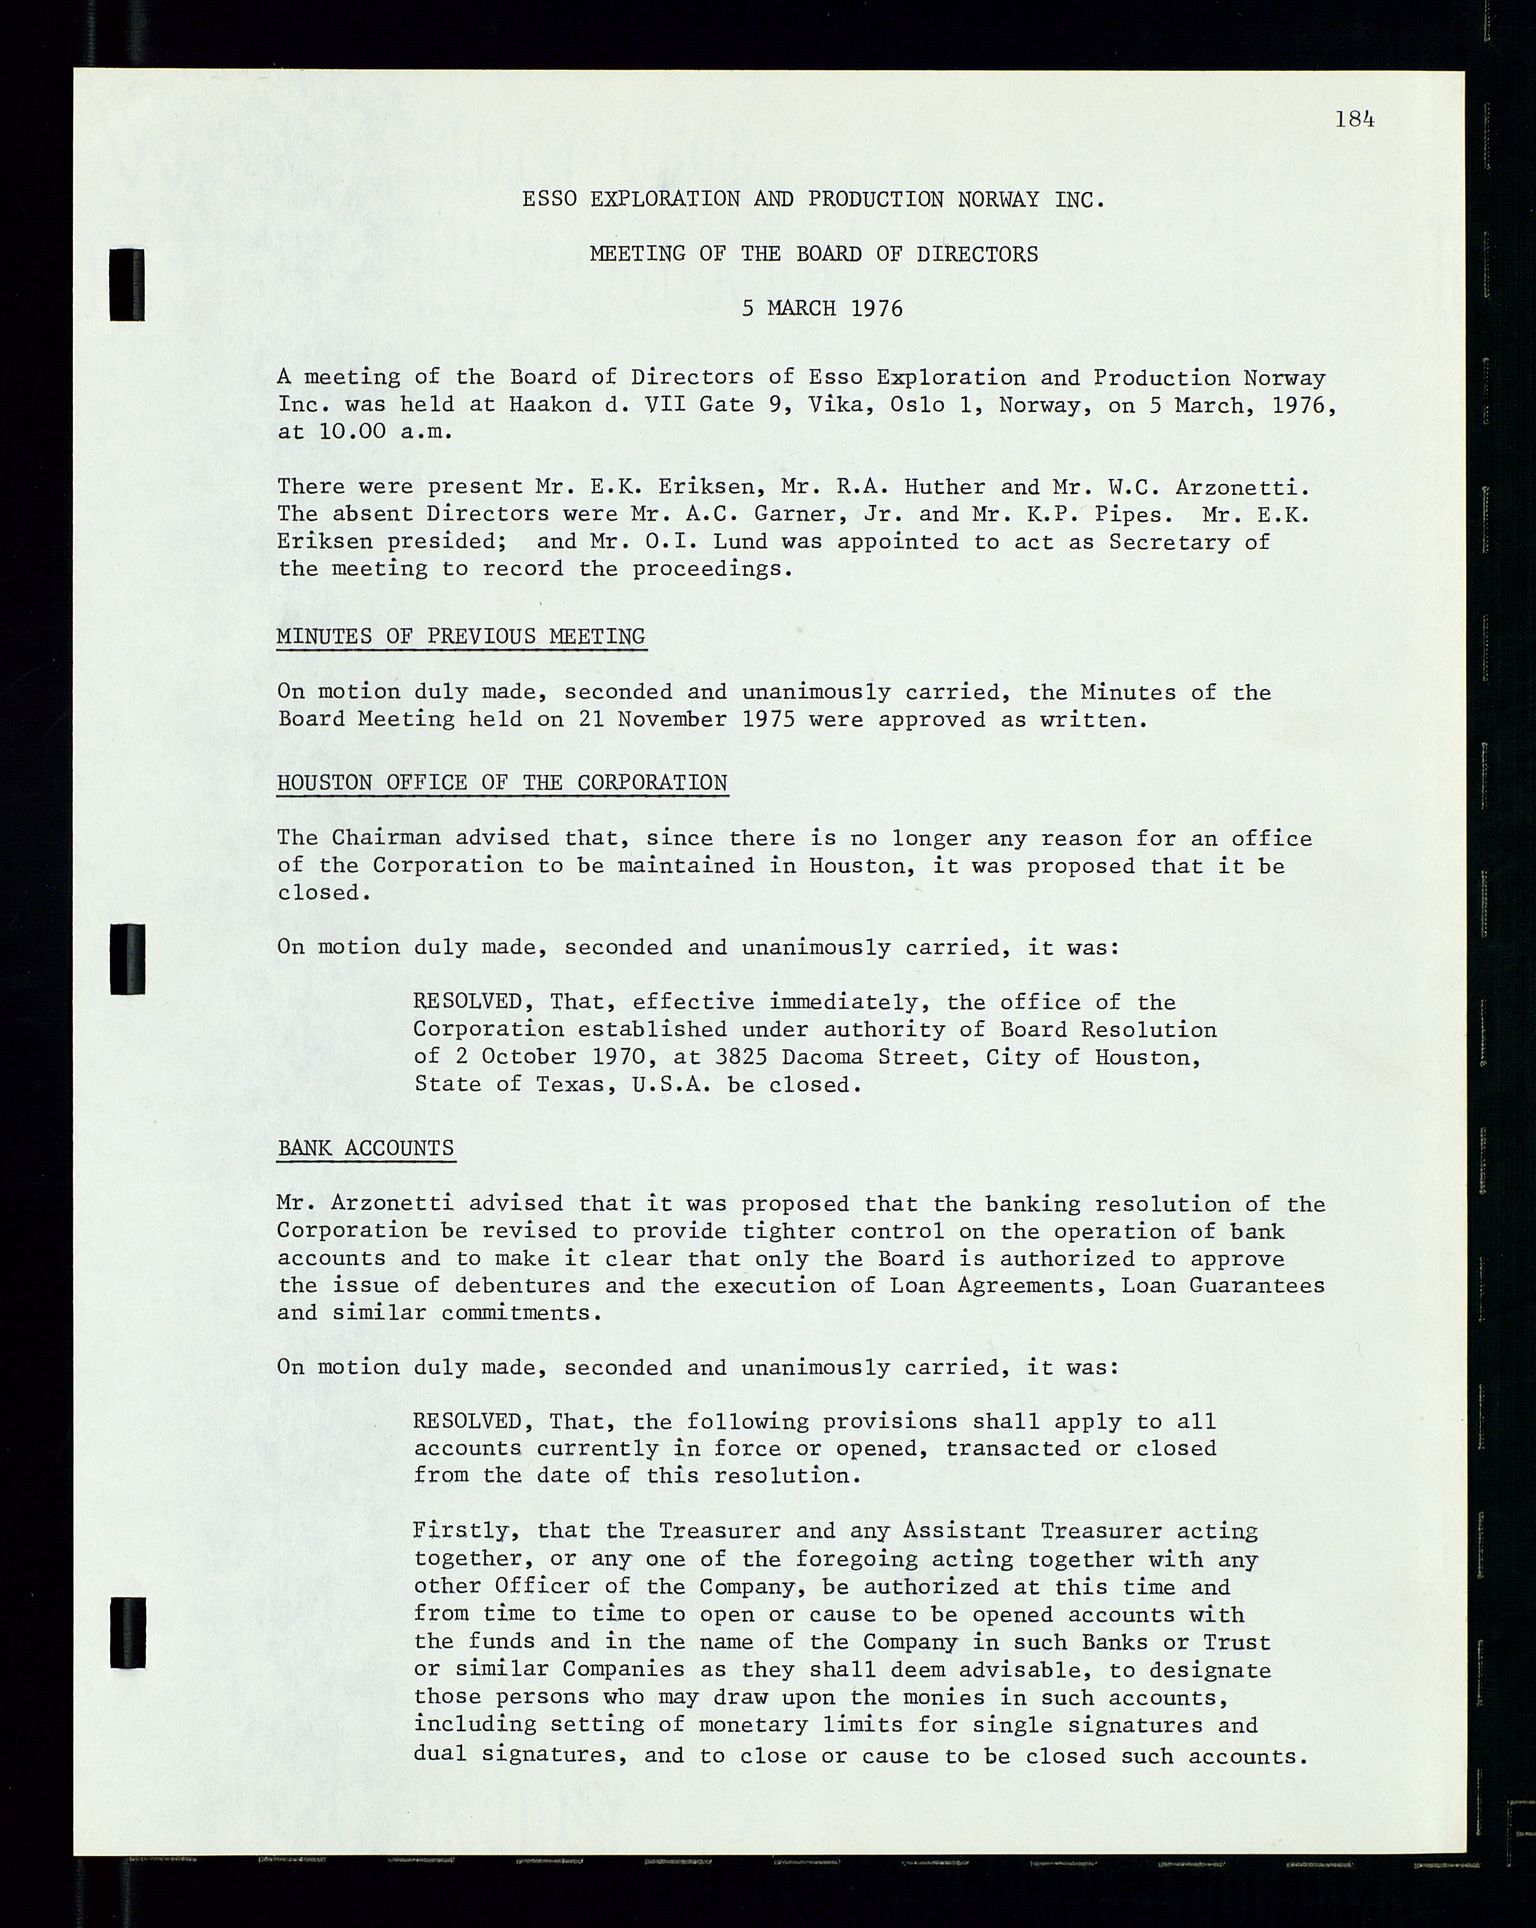 Pa 1512 - Esso Exploration and Production Norway Inc., SAST/A-101917/A/Aa/L0001/0002: Styredokumenter / Corporate records, Board meeting minutes, Agreements, Stocholder meetings, 1975-1979, s. 25